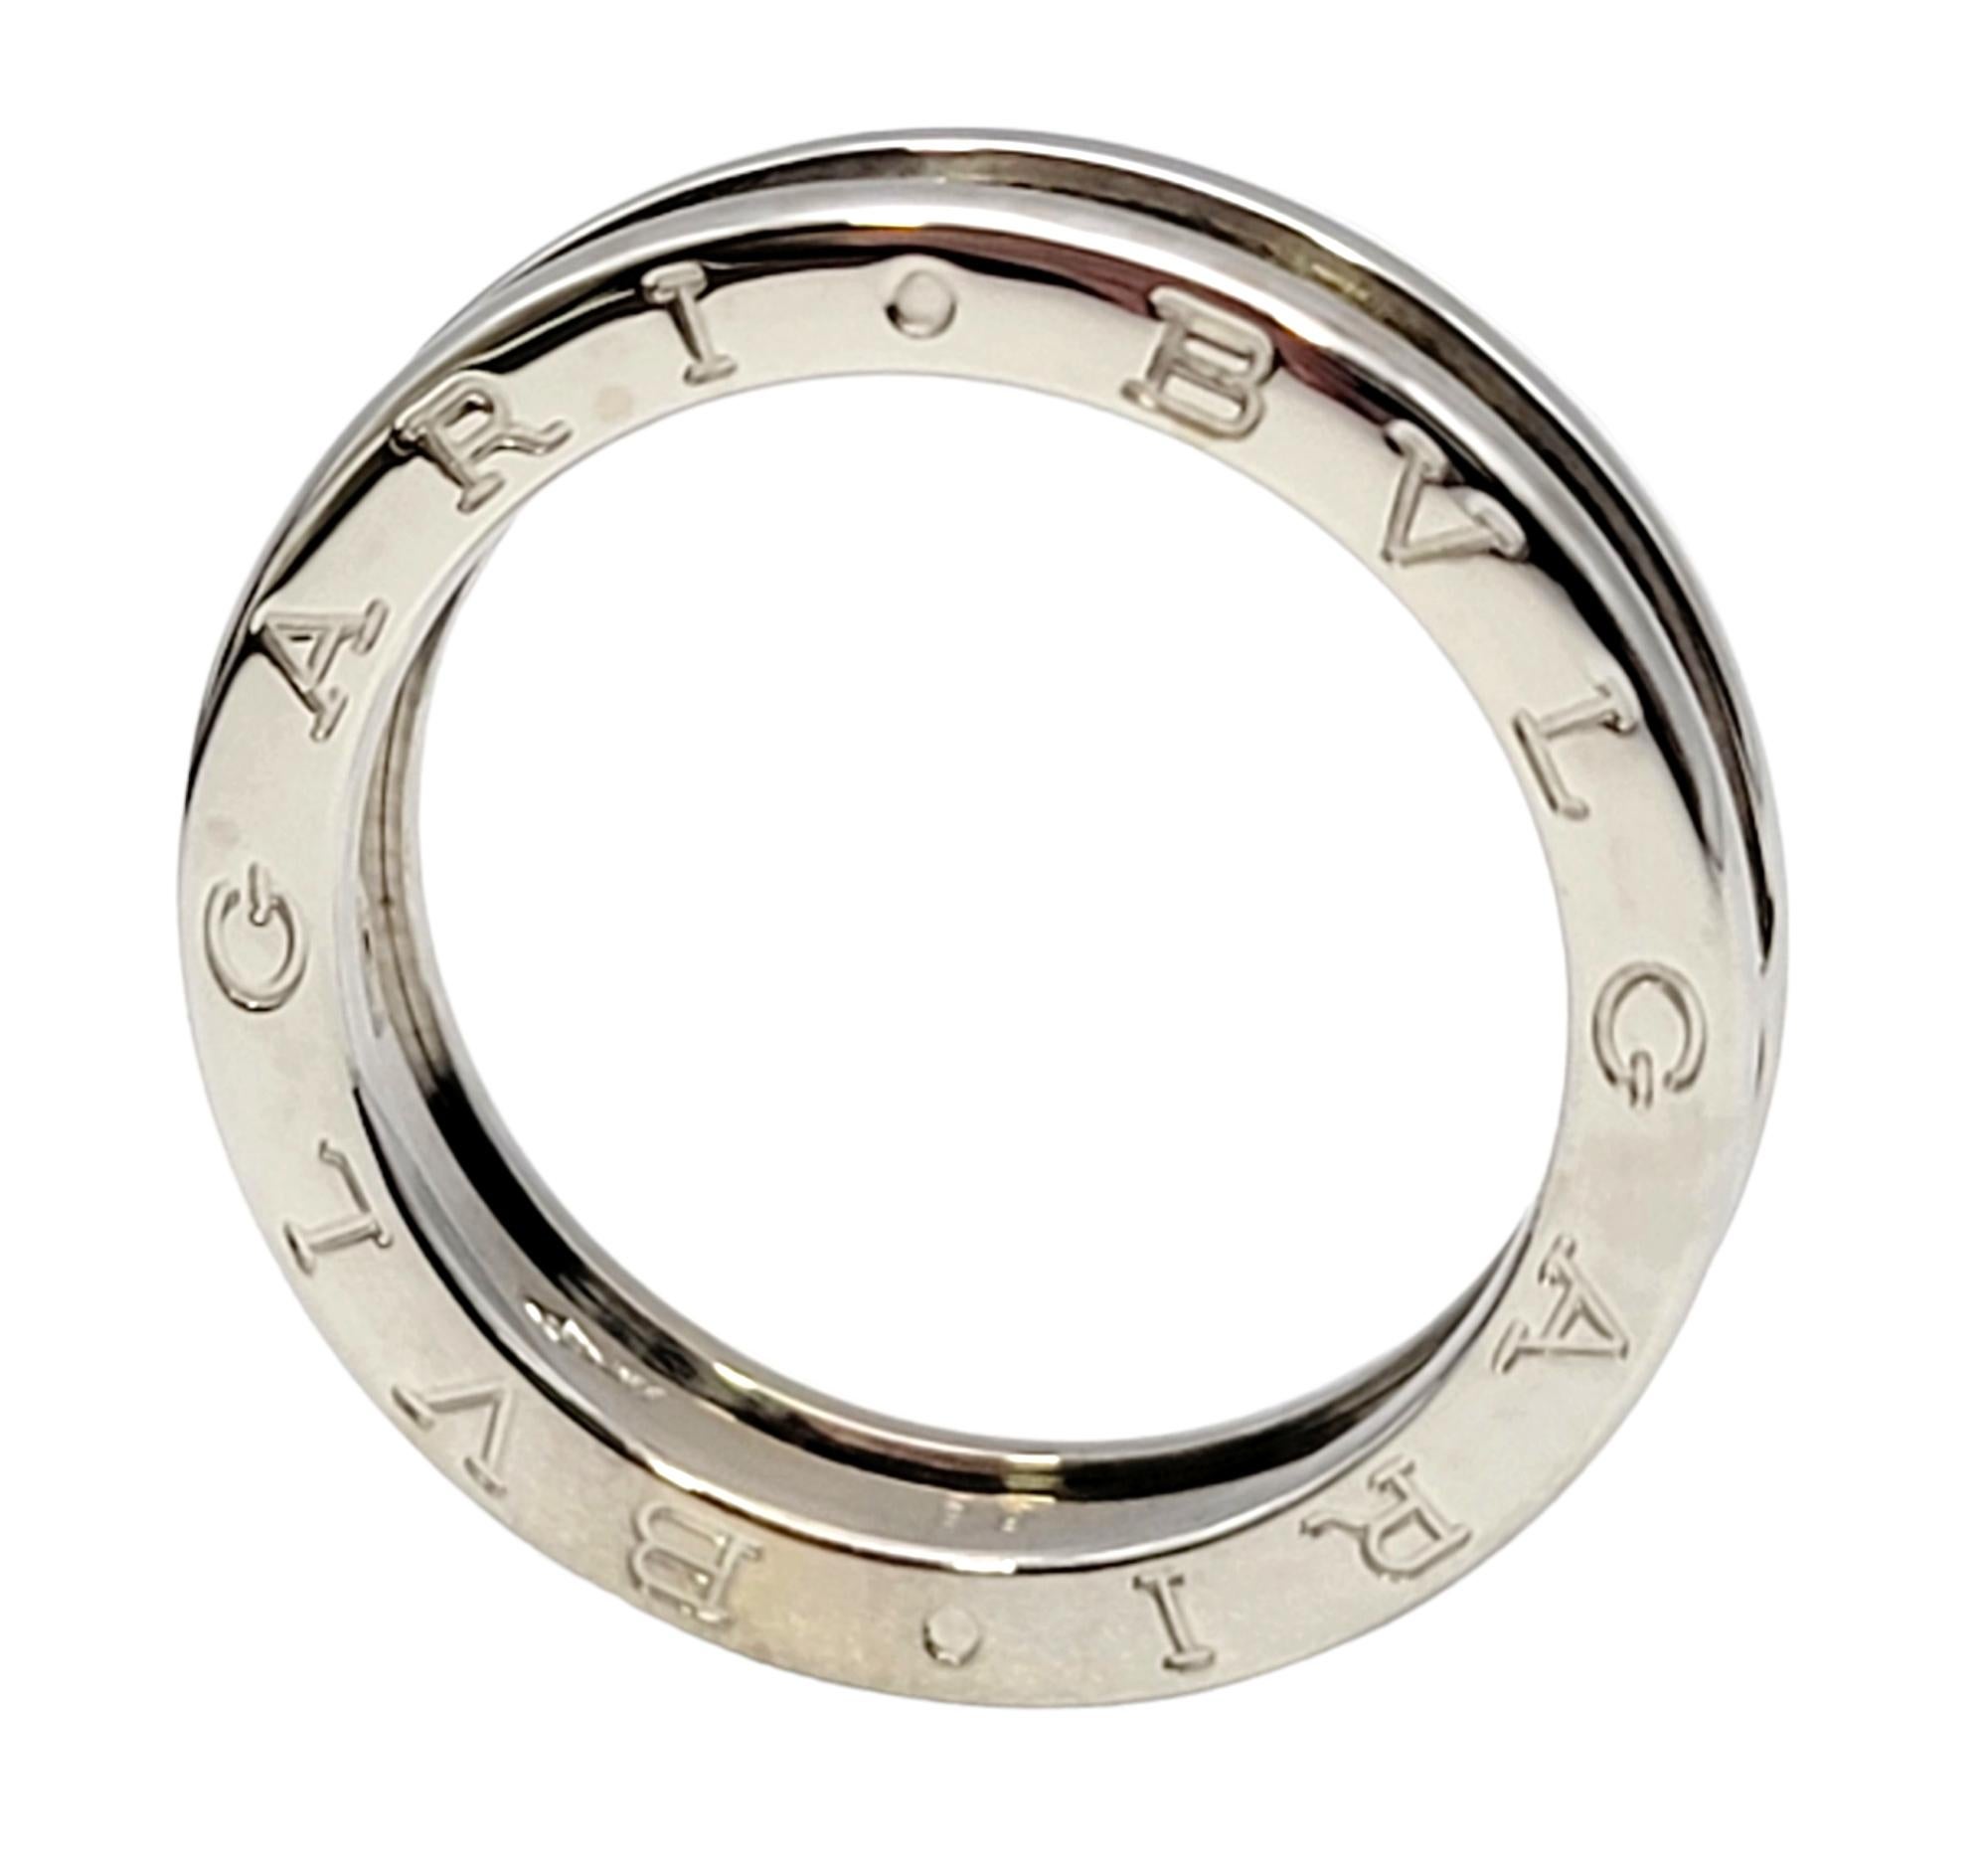 Ring size: 8.5

Sleek 18 karat white gold contemporary designer band ring by Italian luxury brand, Bvlgari. 

Metal: 18K White Gold
Ring size: 8.5
Euro size: 58
Outer diameter: 24.3 mm
Band Width: 4.82 mm
Weight: 6.8 grams
Stamped: Made in ITALY,